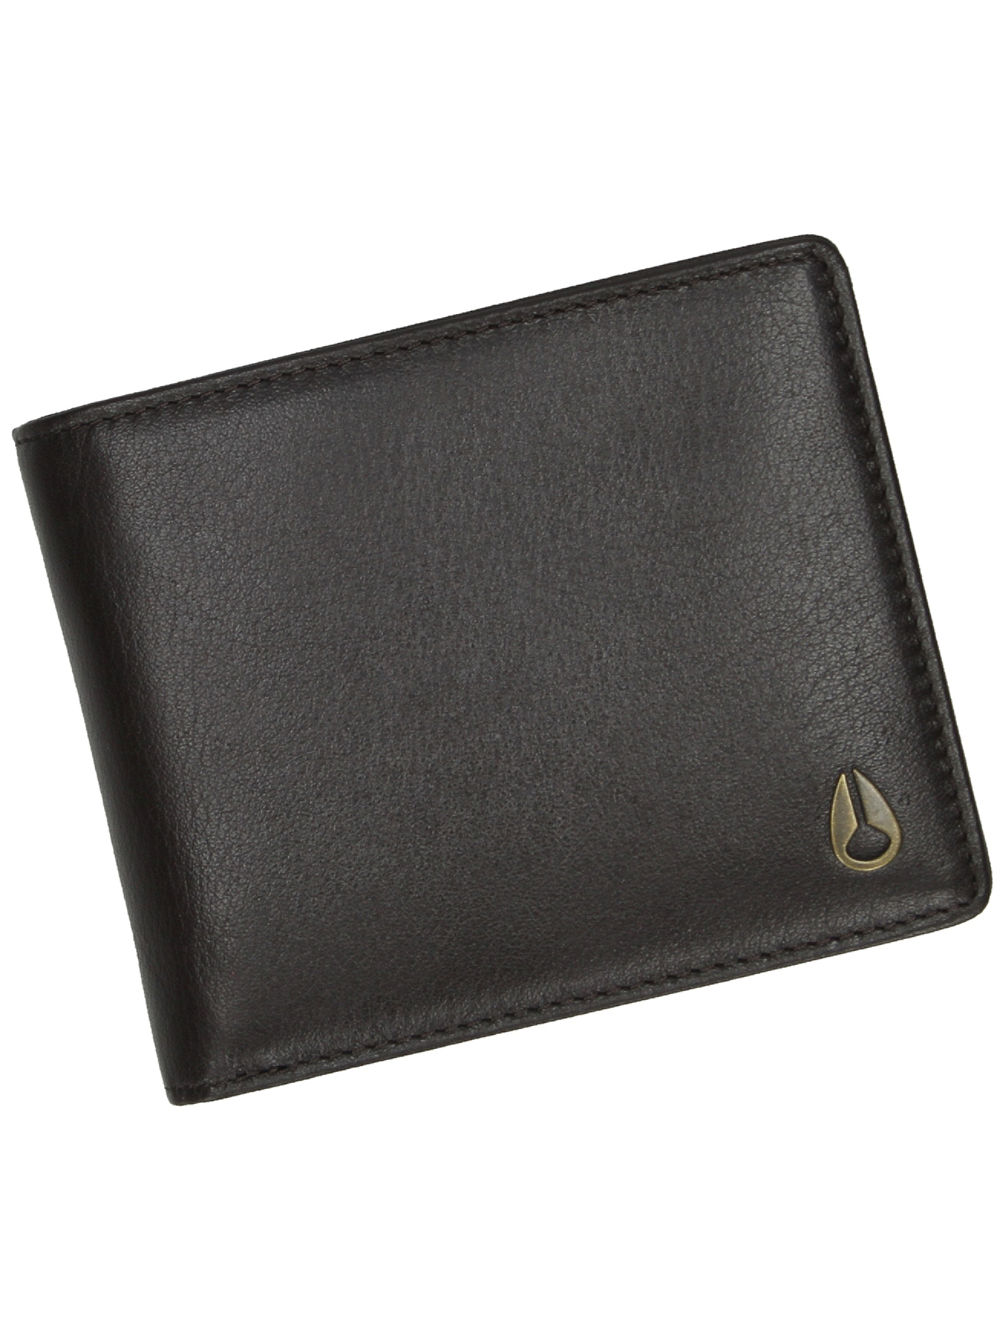 Pass Leather Coin Portefeuille